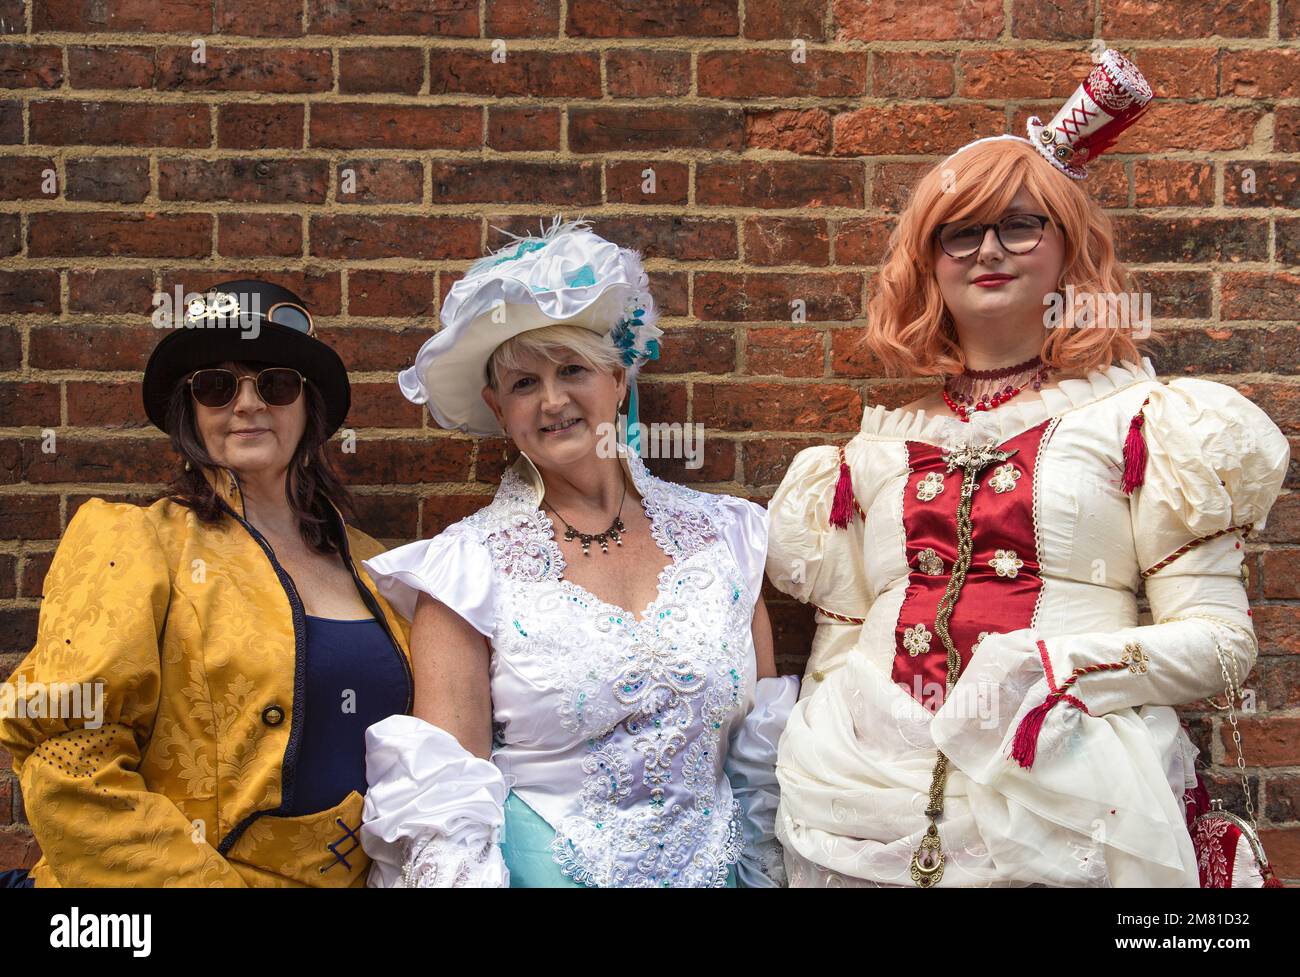 Portrait of three women, female steampunks, smiling while standing next to a wall. Dressed in period costume, steampunk clothing. Stock Photo